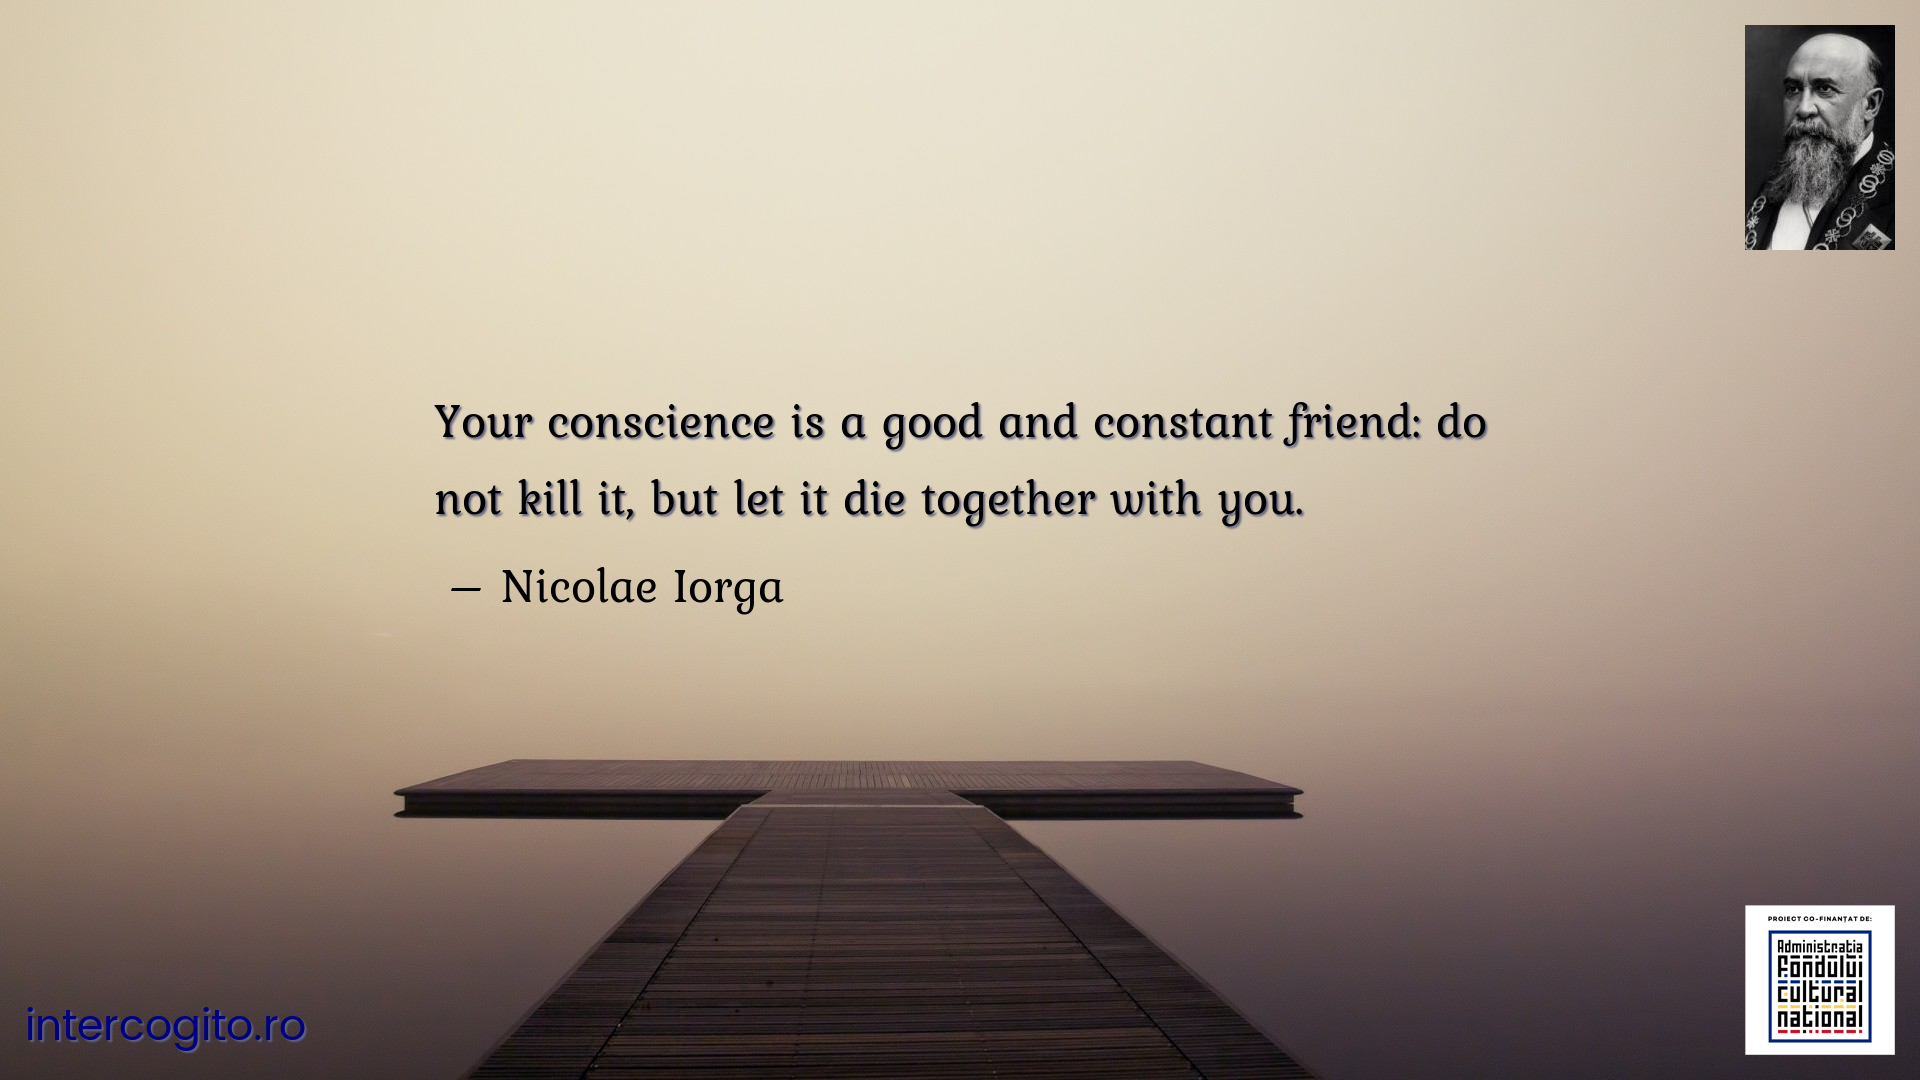 Your conscience is a good and constant friend: do not kill it, but let it die together with you.